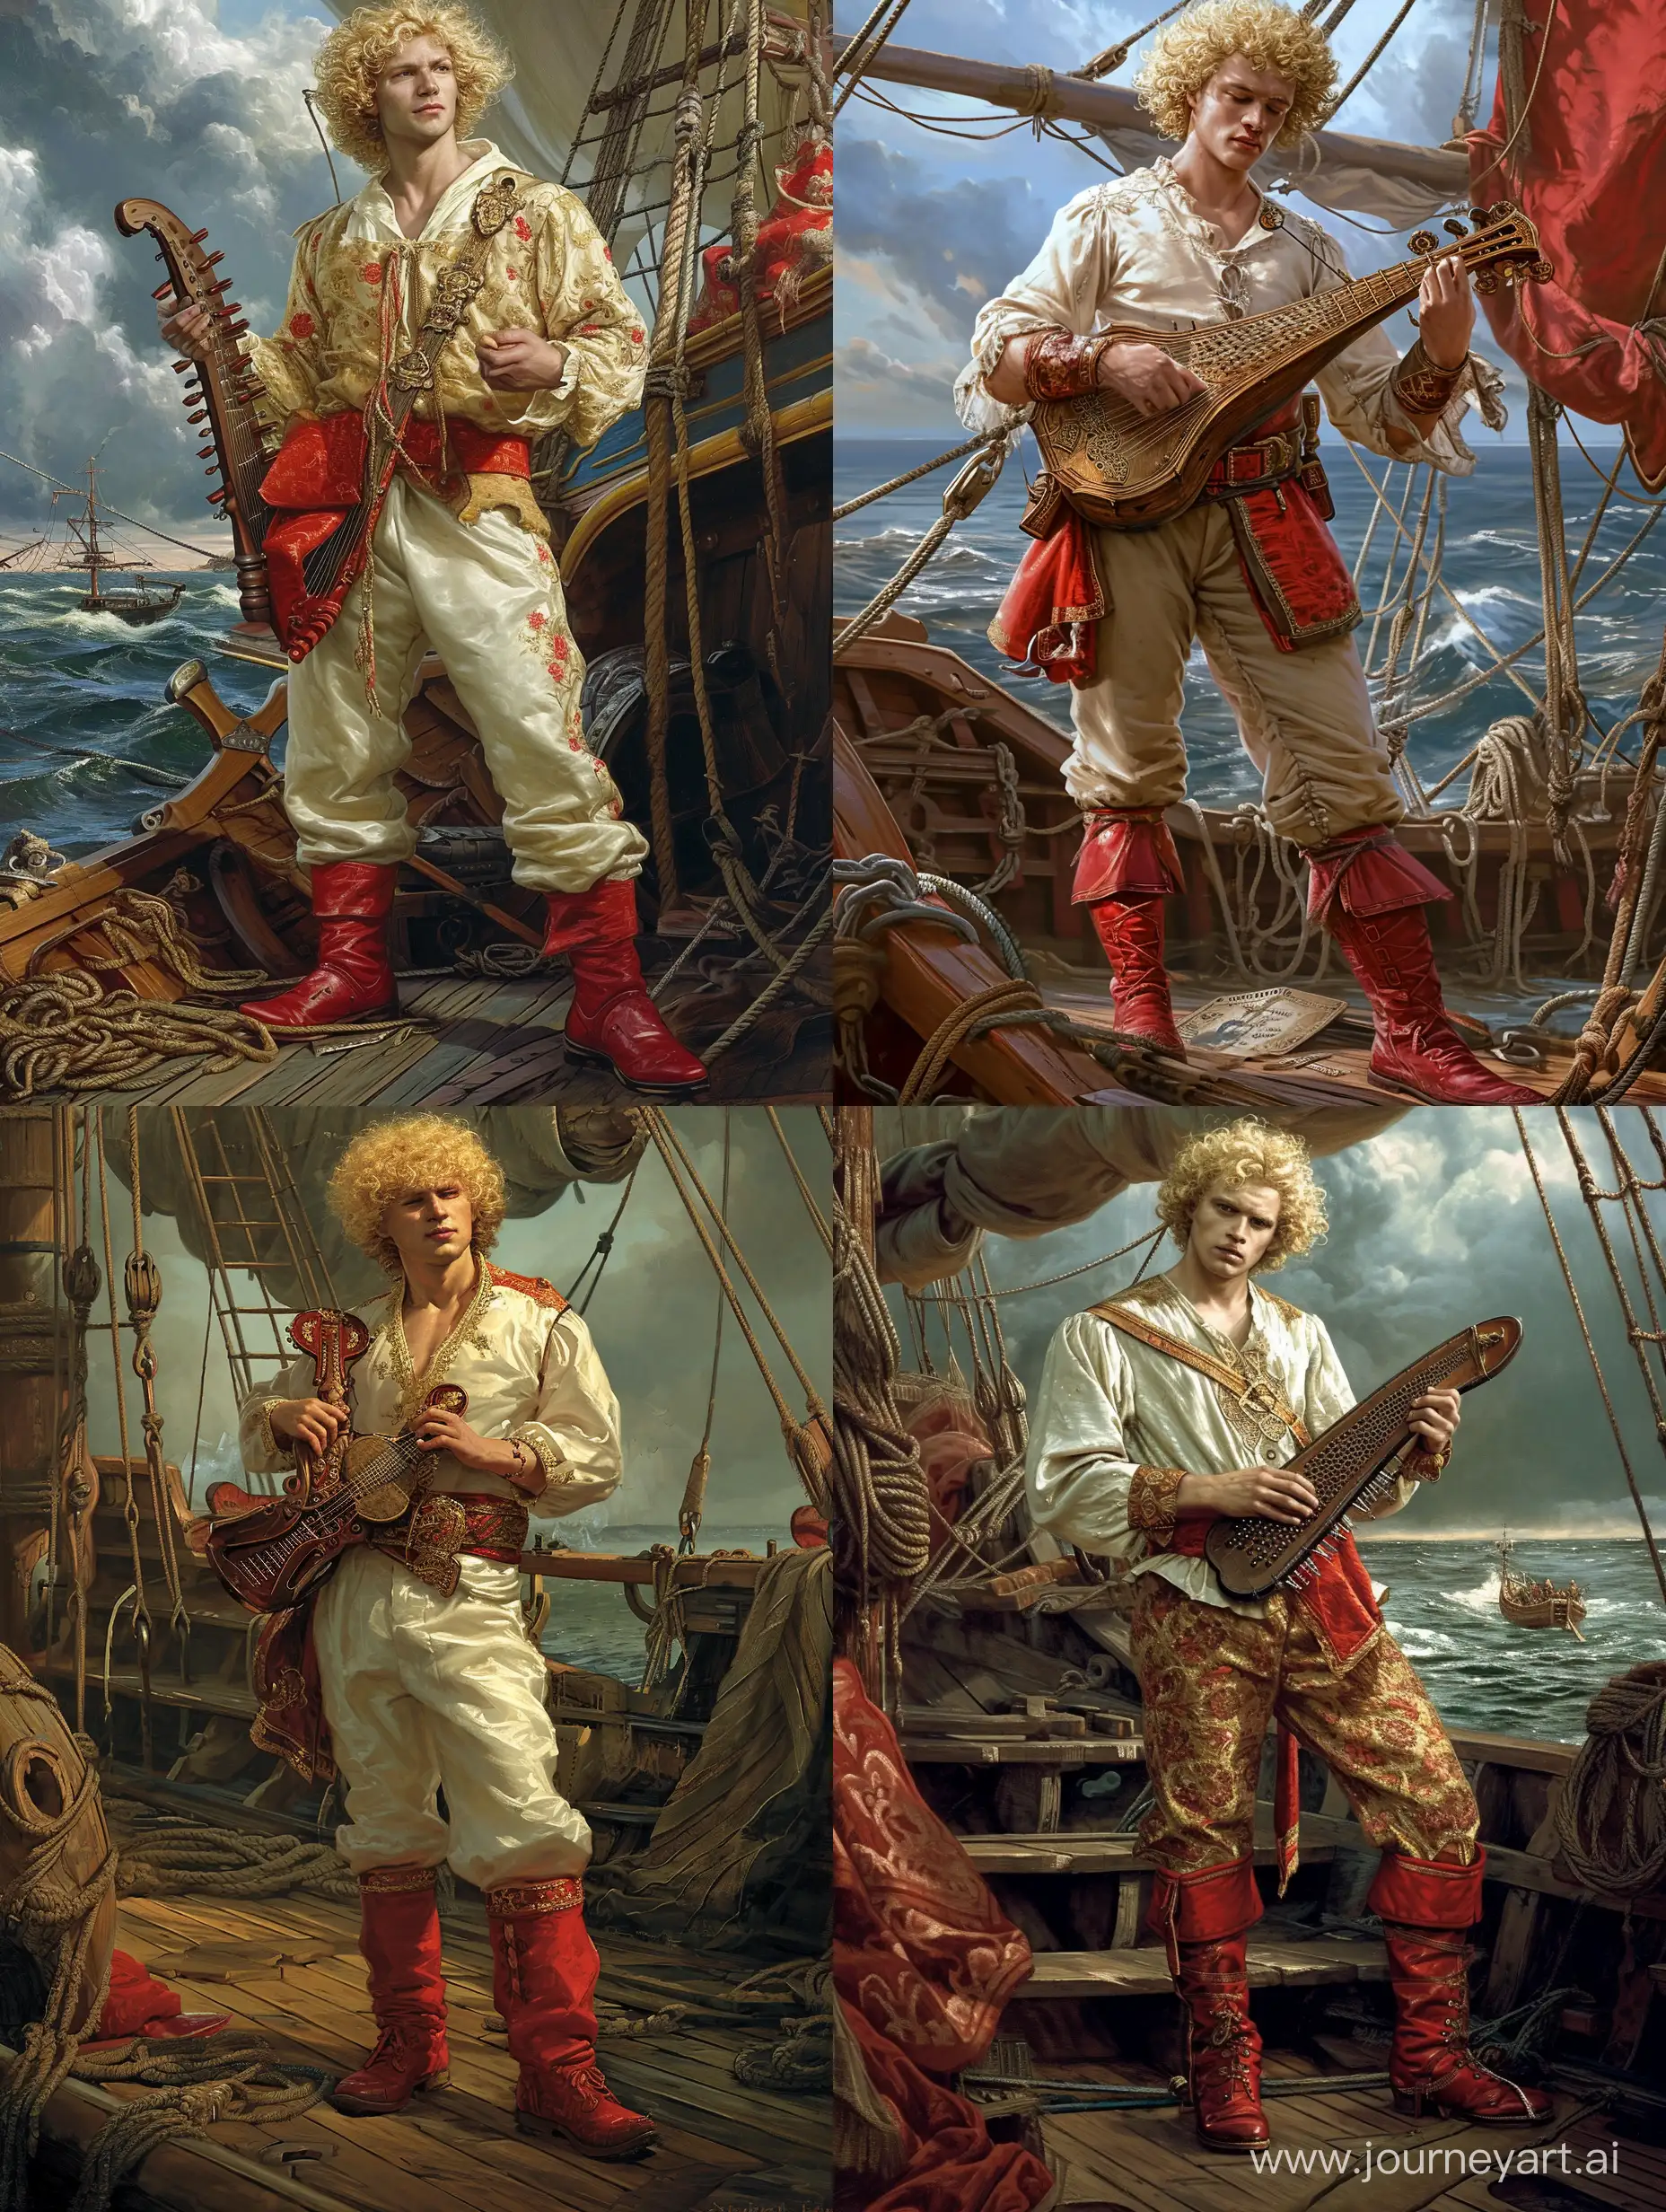 Russian Russian fairy tale hero, a man of heroic stature, very strong, full-length, beautiful Russian shirt and trousers, red boots on his feet, blonde curly hair, he holds a psaltery in his hands, he stands on the deck of an ancient Russian ship and plays music,  a gloomy atmosphere, mysticism, folklore